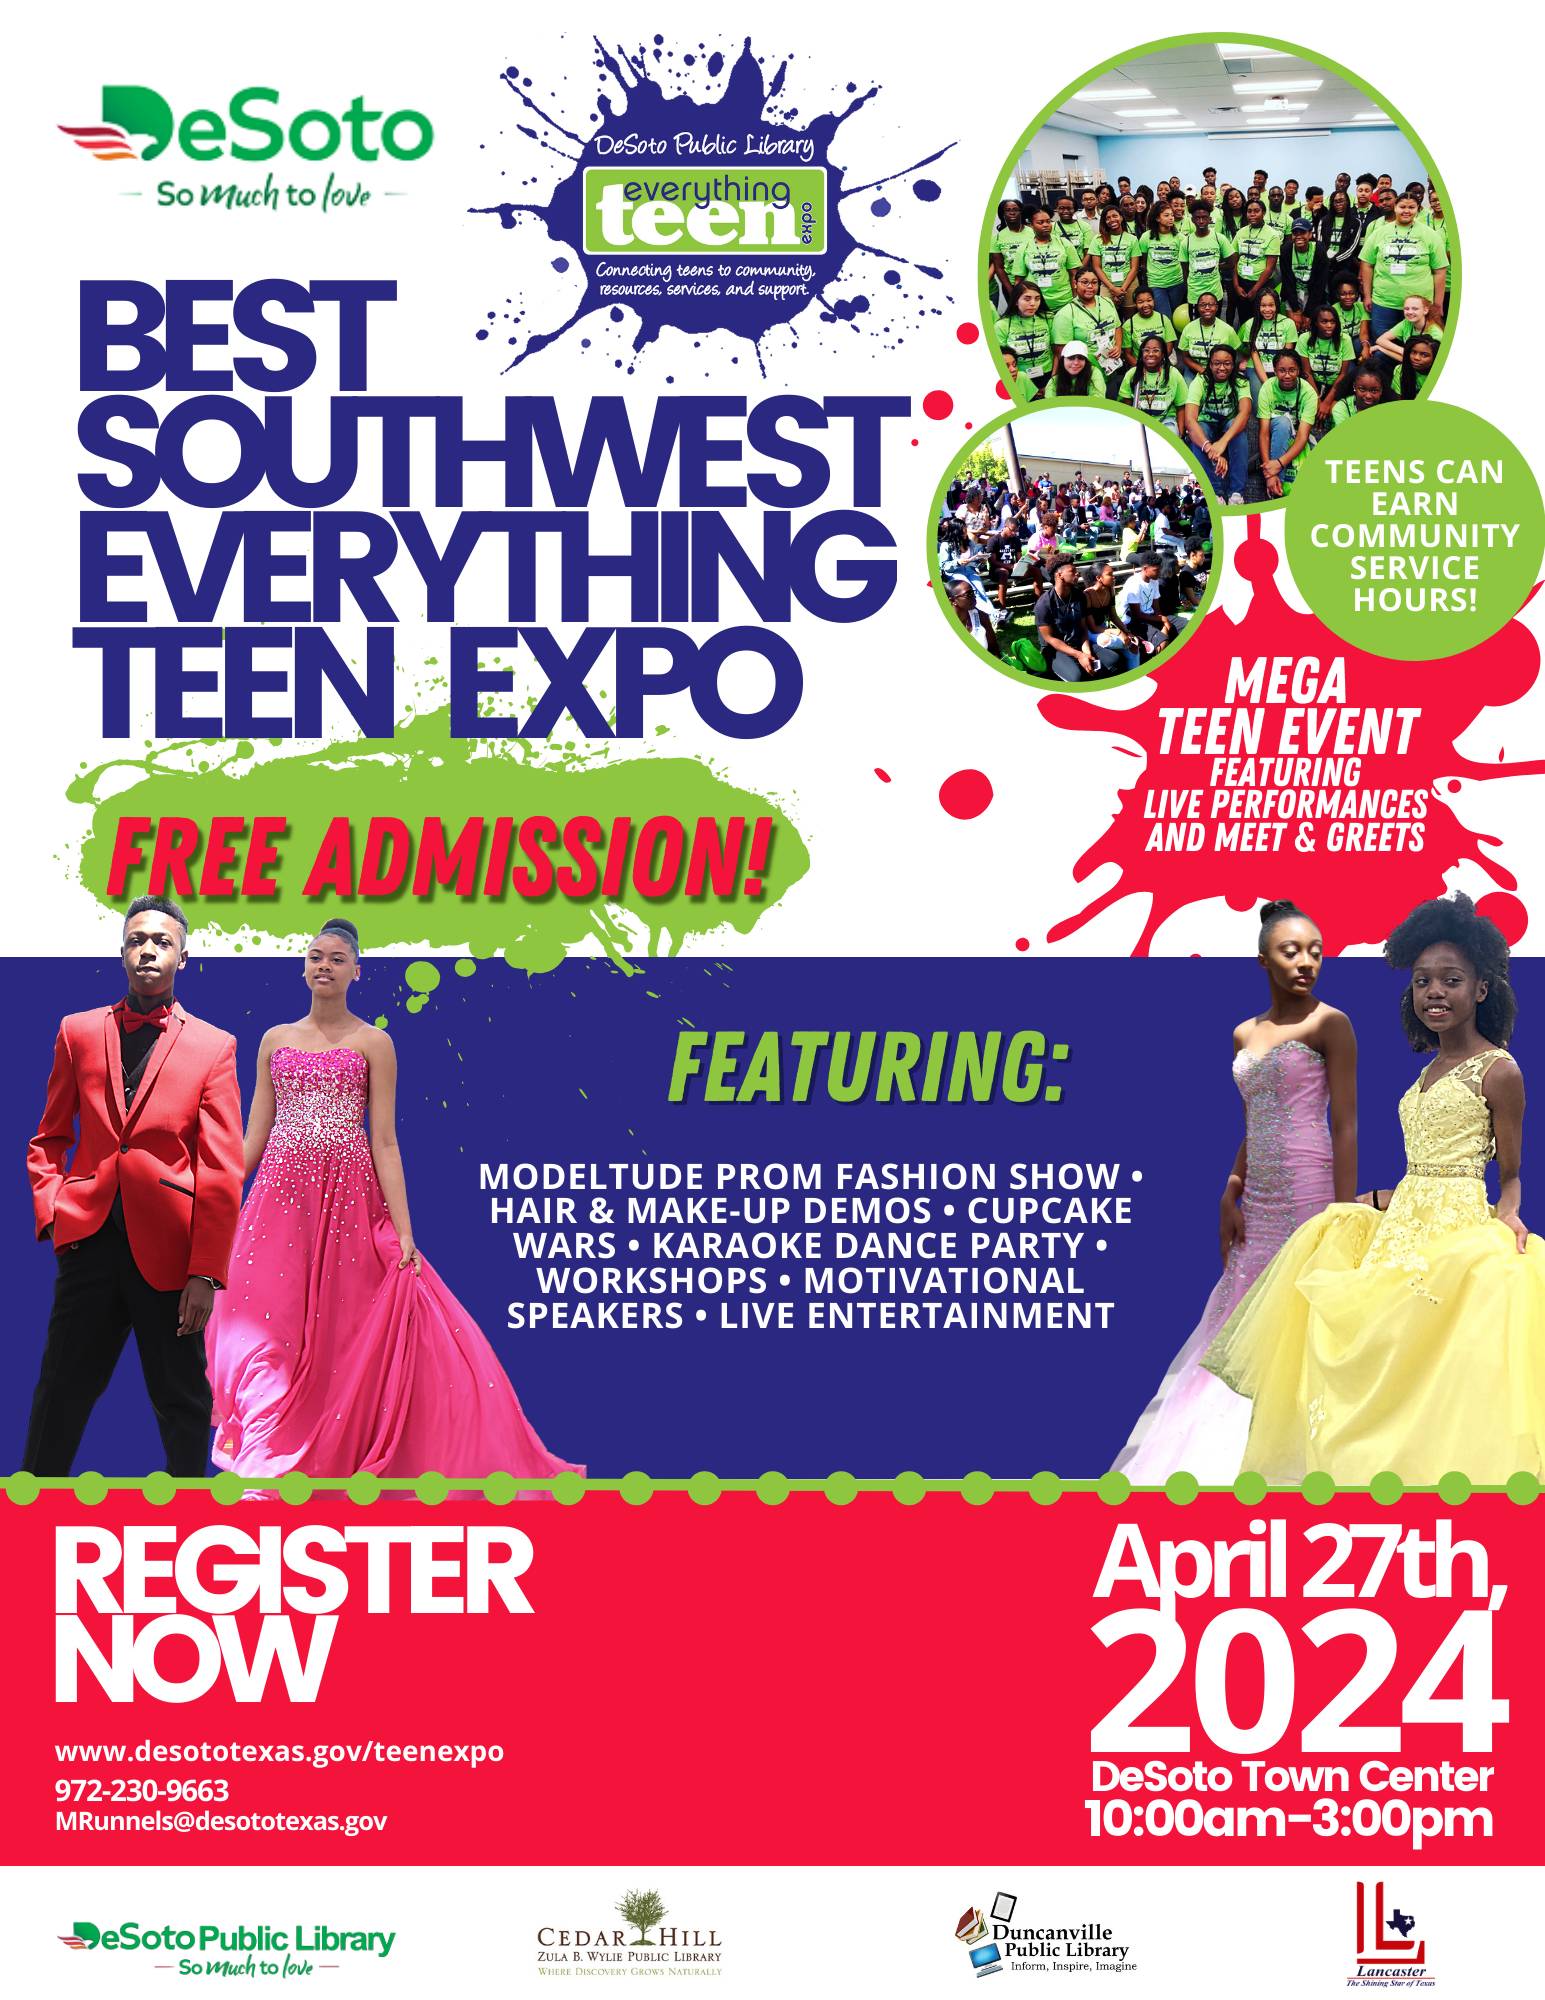 Everything Teen Expo 2024 flyer